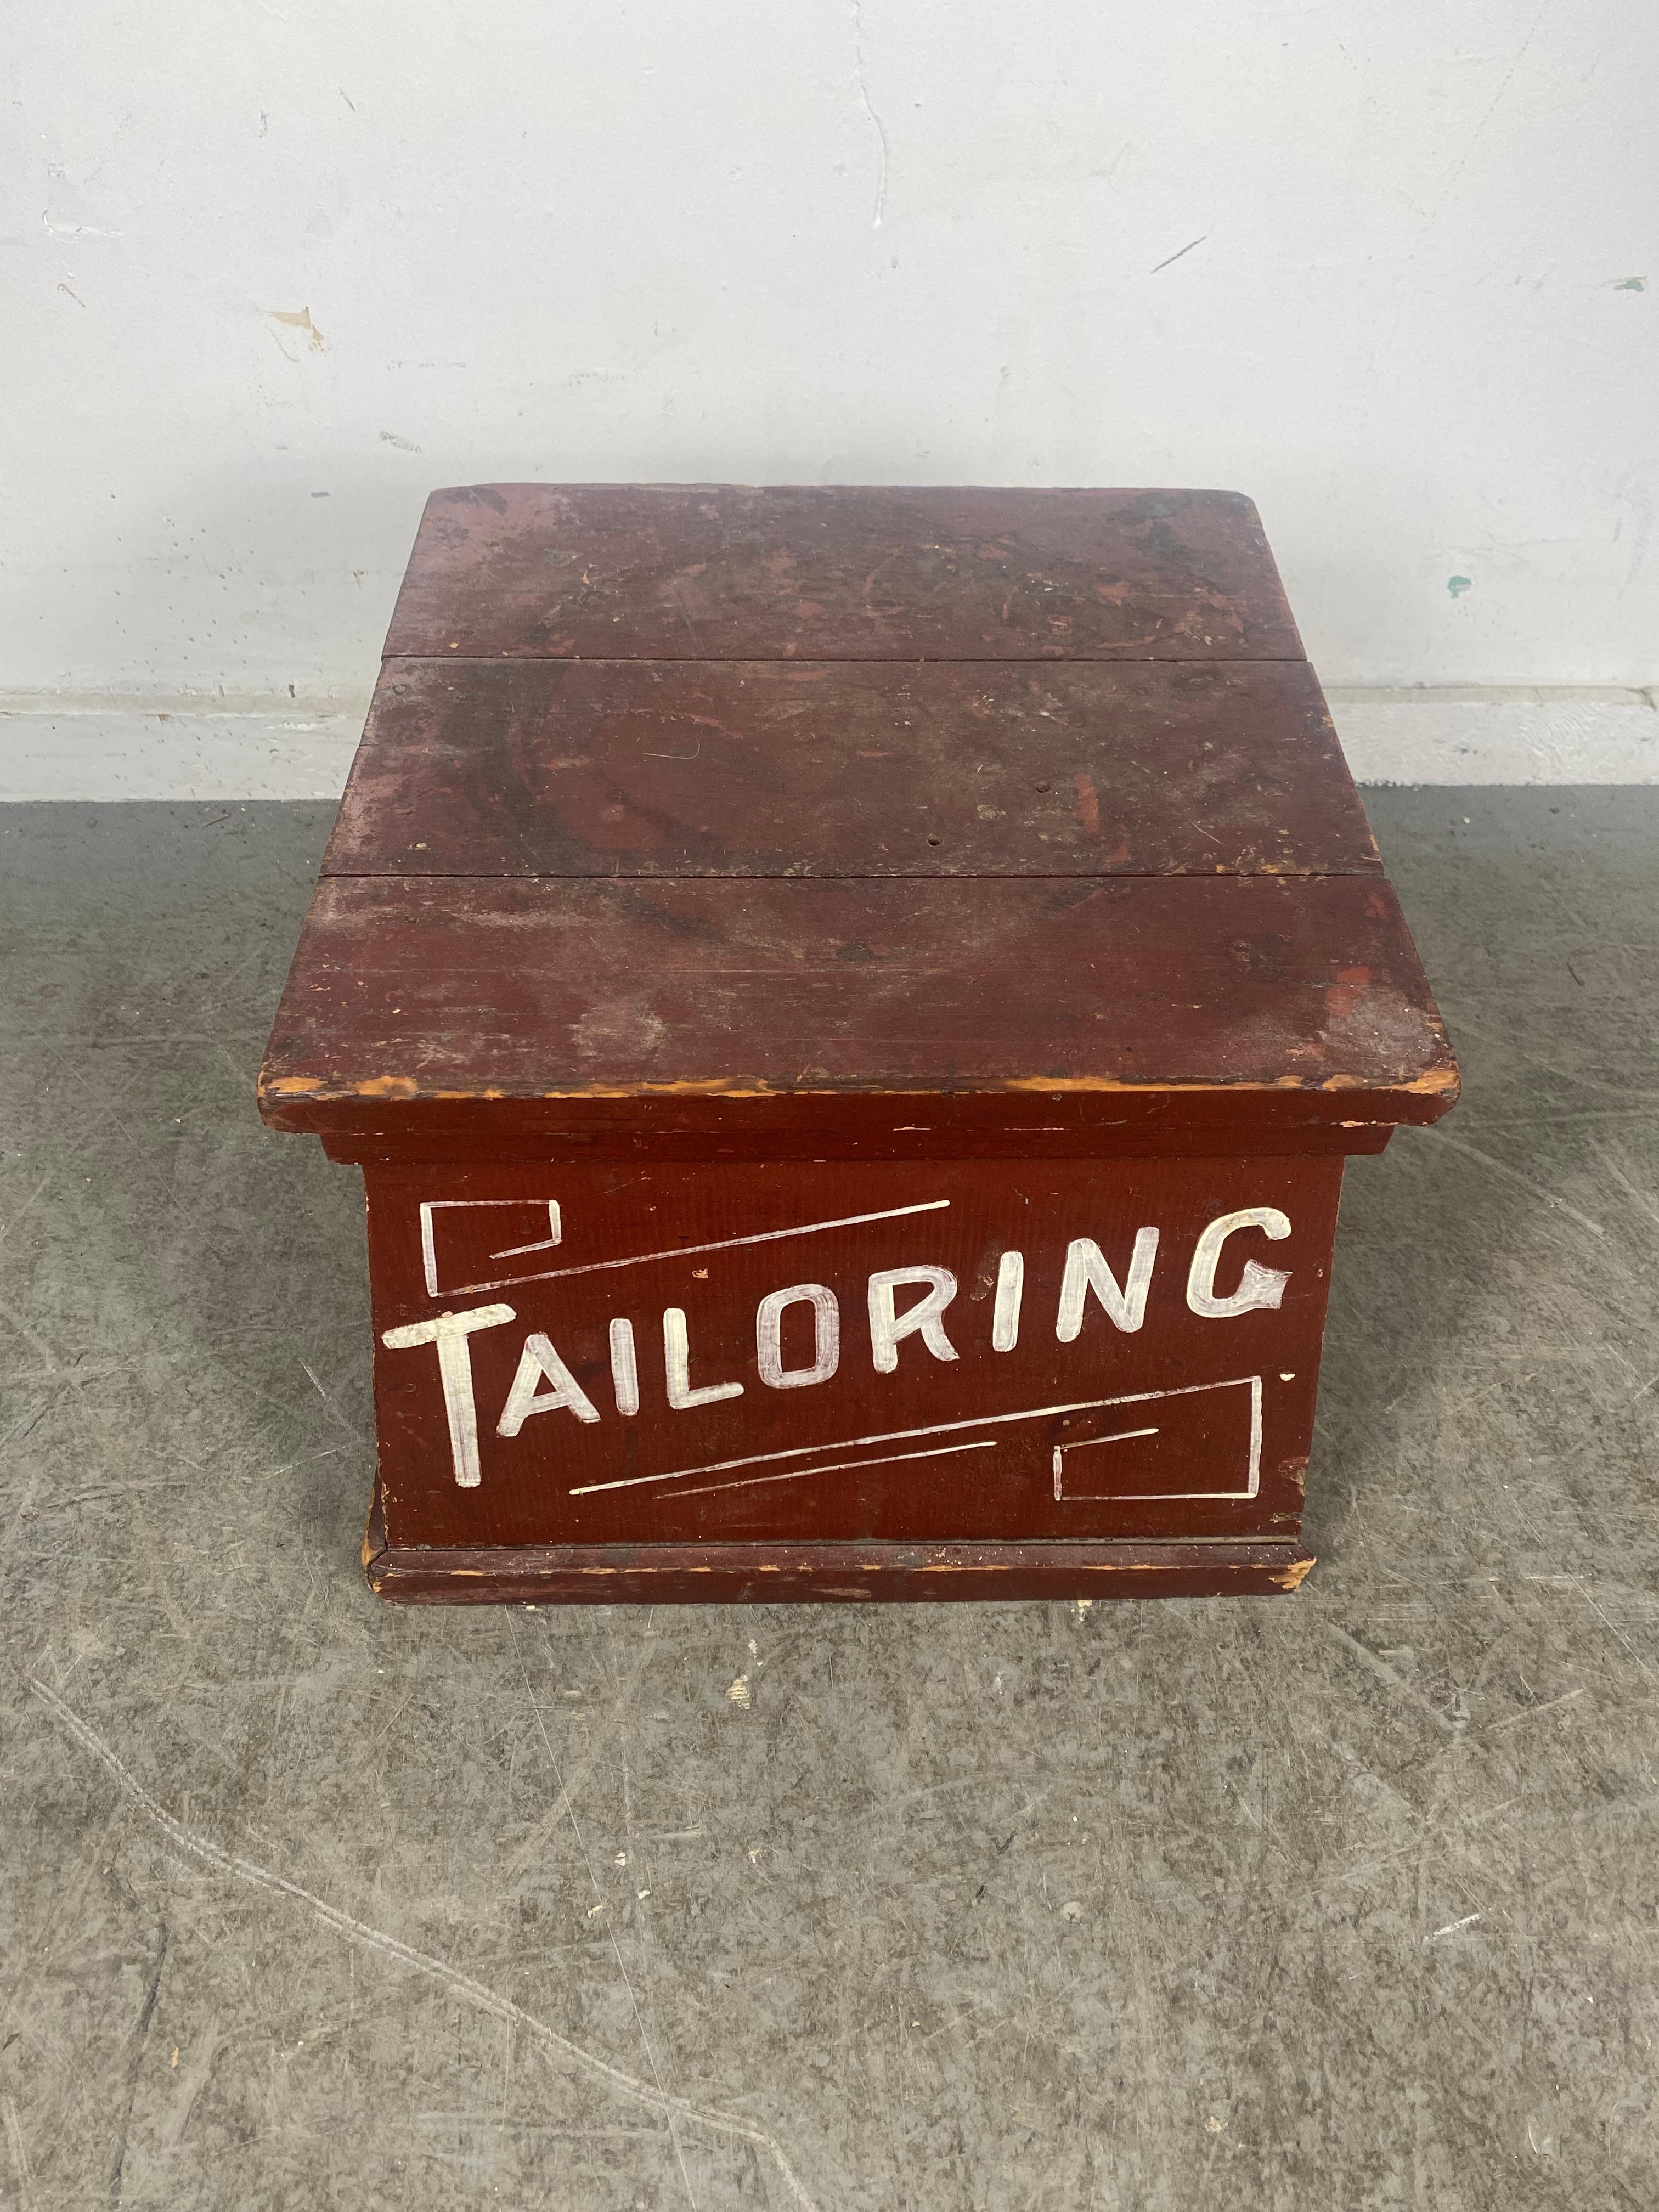 Great old item. Salvaged from downtown Buffalo Ny Clothing store. Hand crafted and hand painted, alterations fitting platform, Wonderful color, surface and patina. Great graphics, lettering.